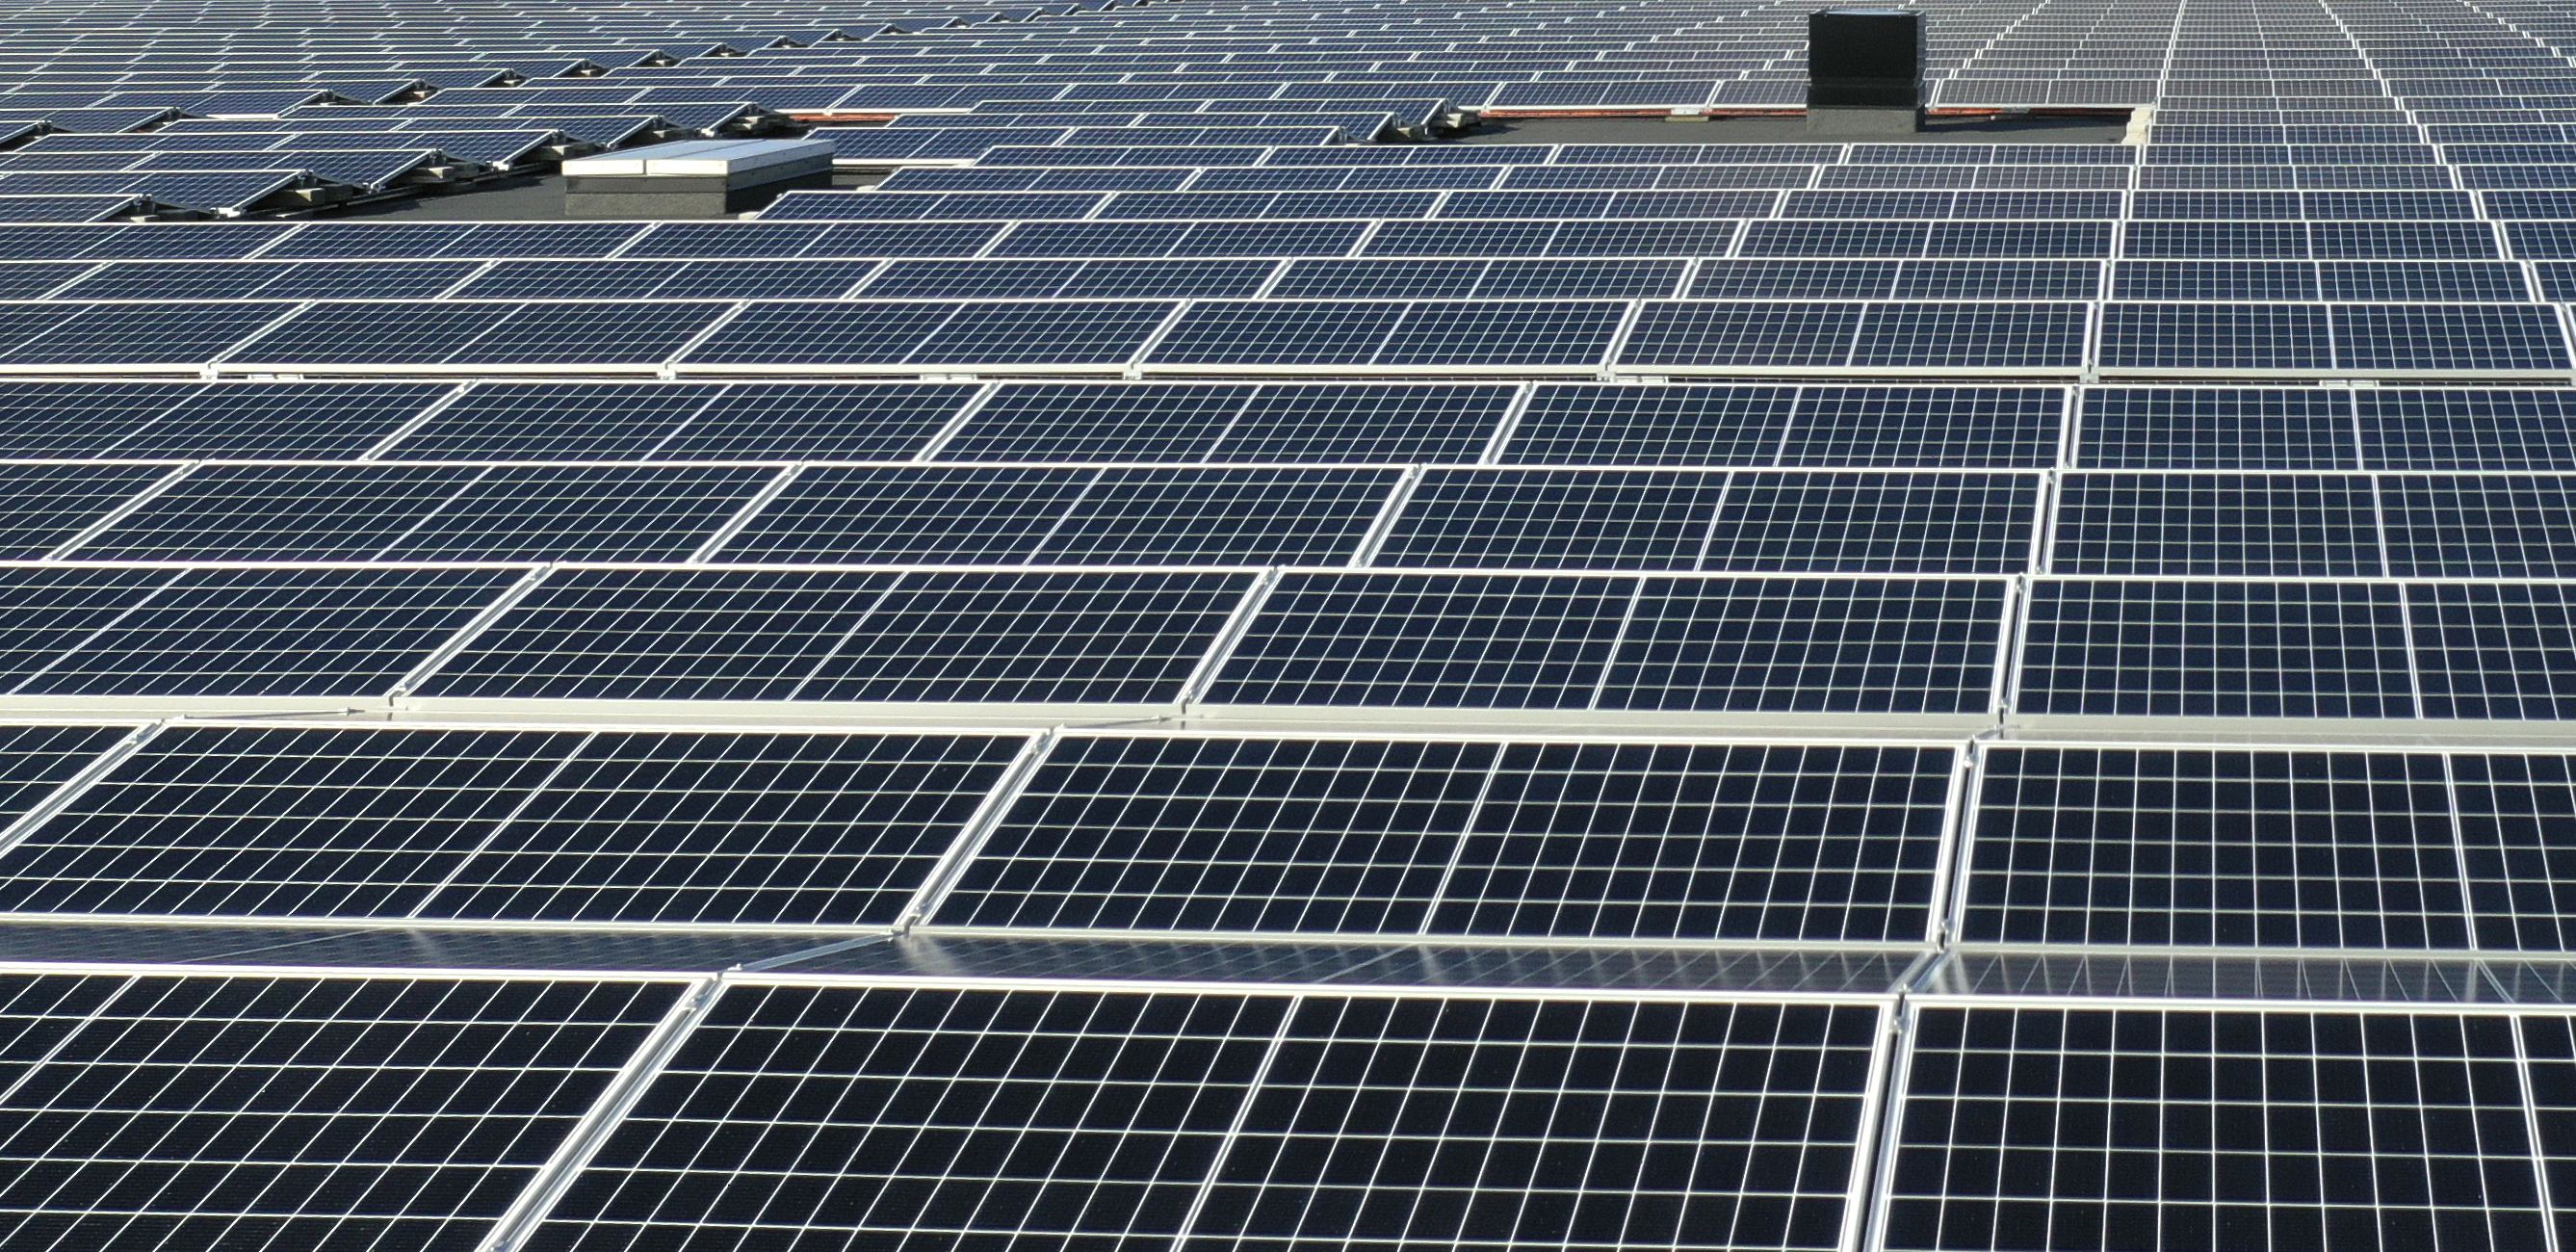 Soltech is building large solar energy solutions for Castellum and City Gross with an order value of SEK 5 million